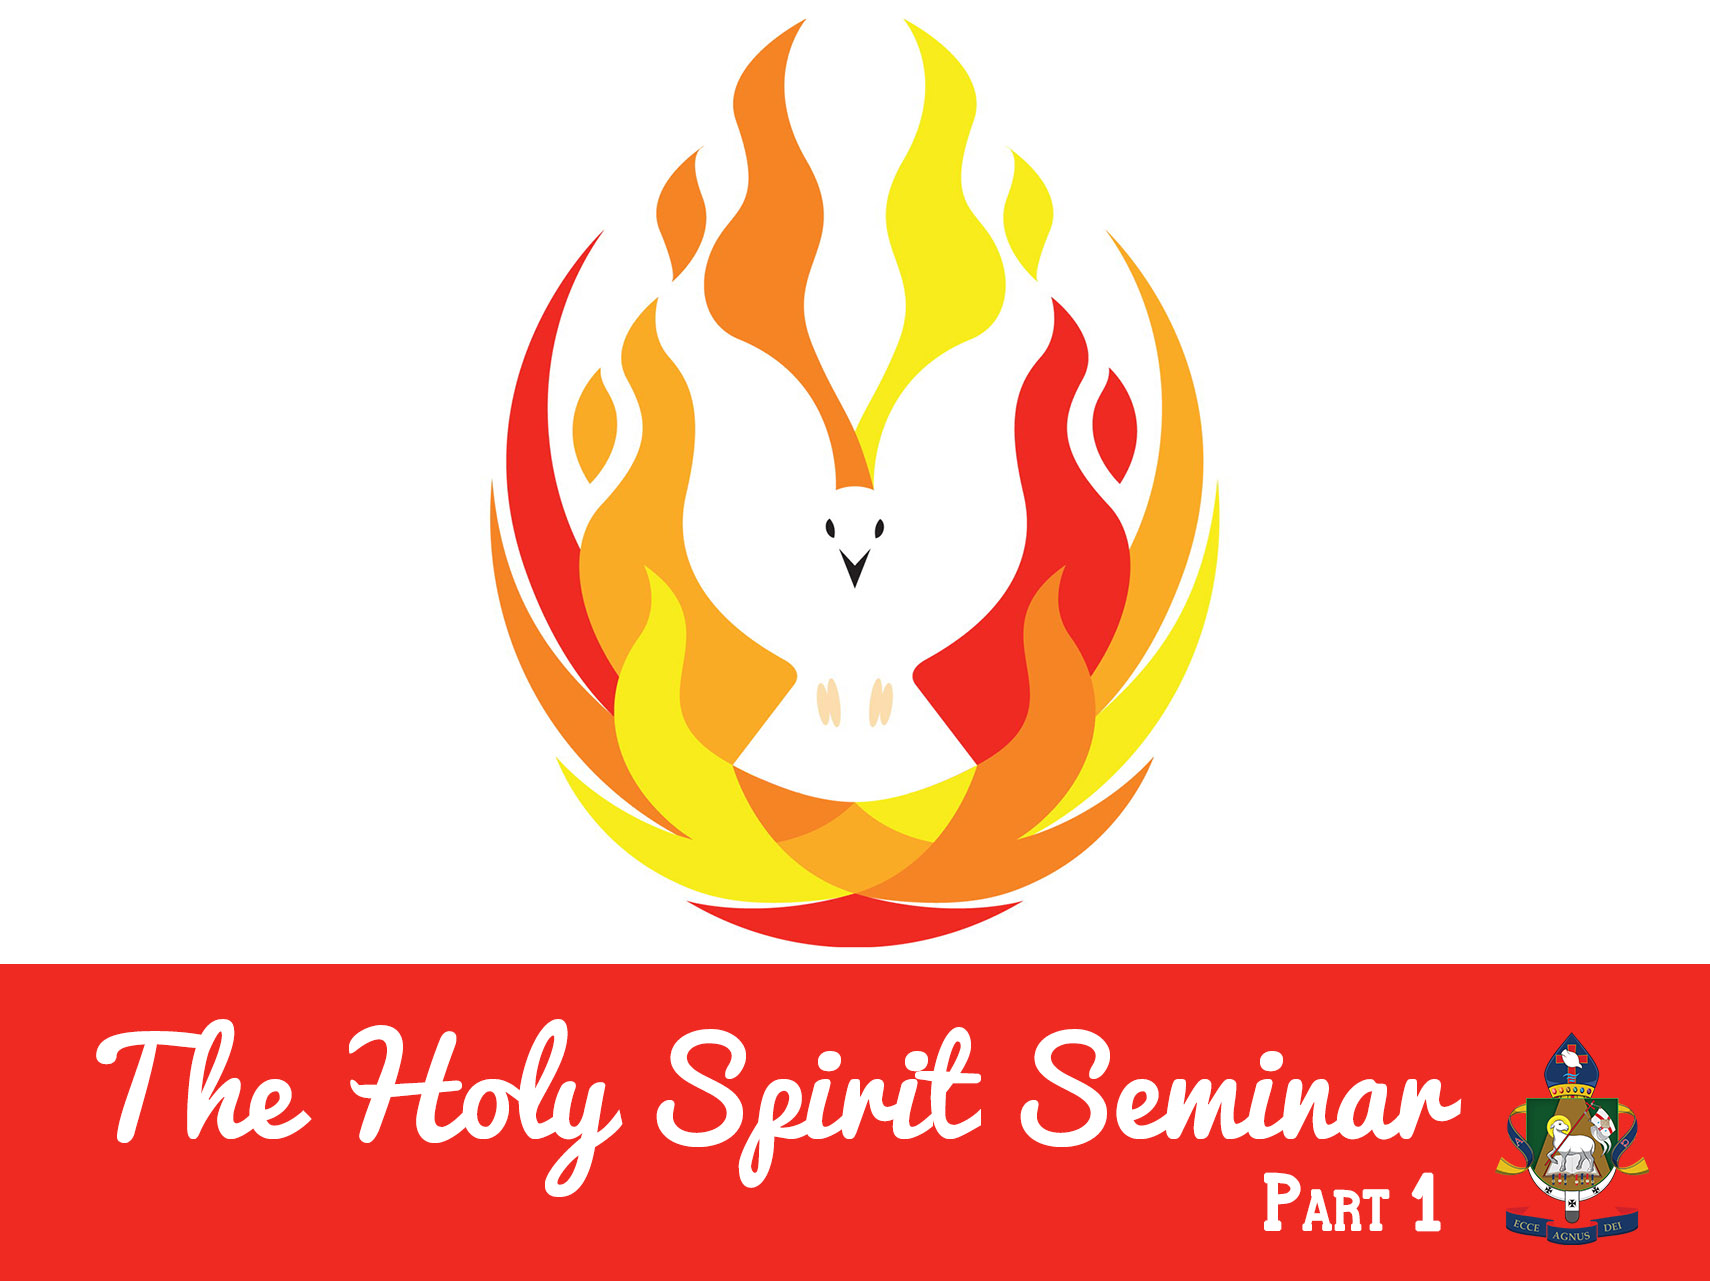 Empowered By The Holy Spirit